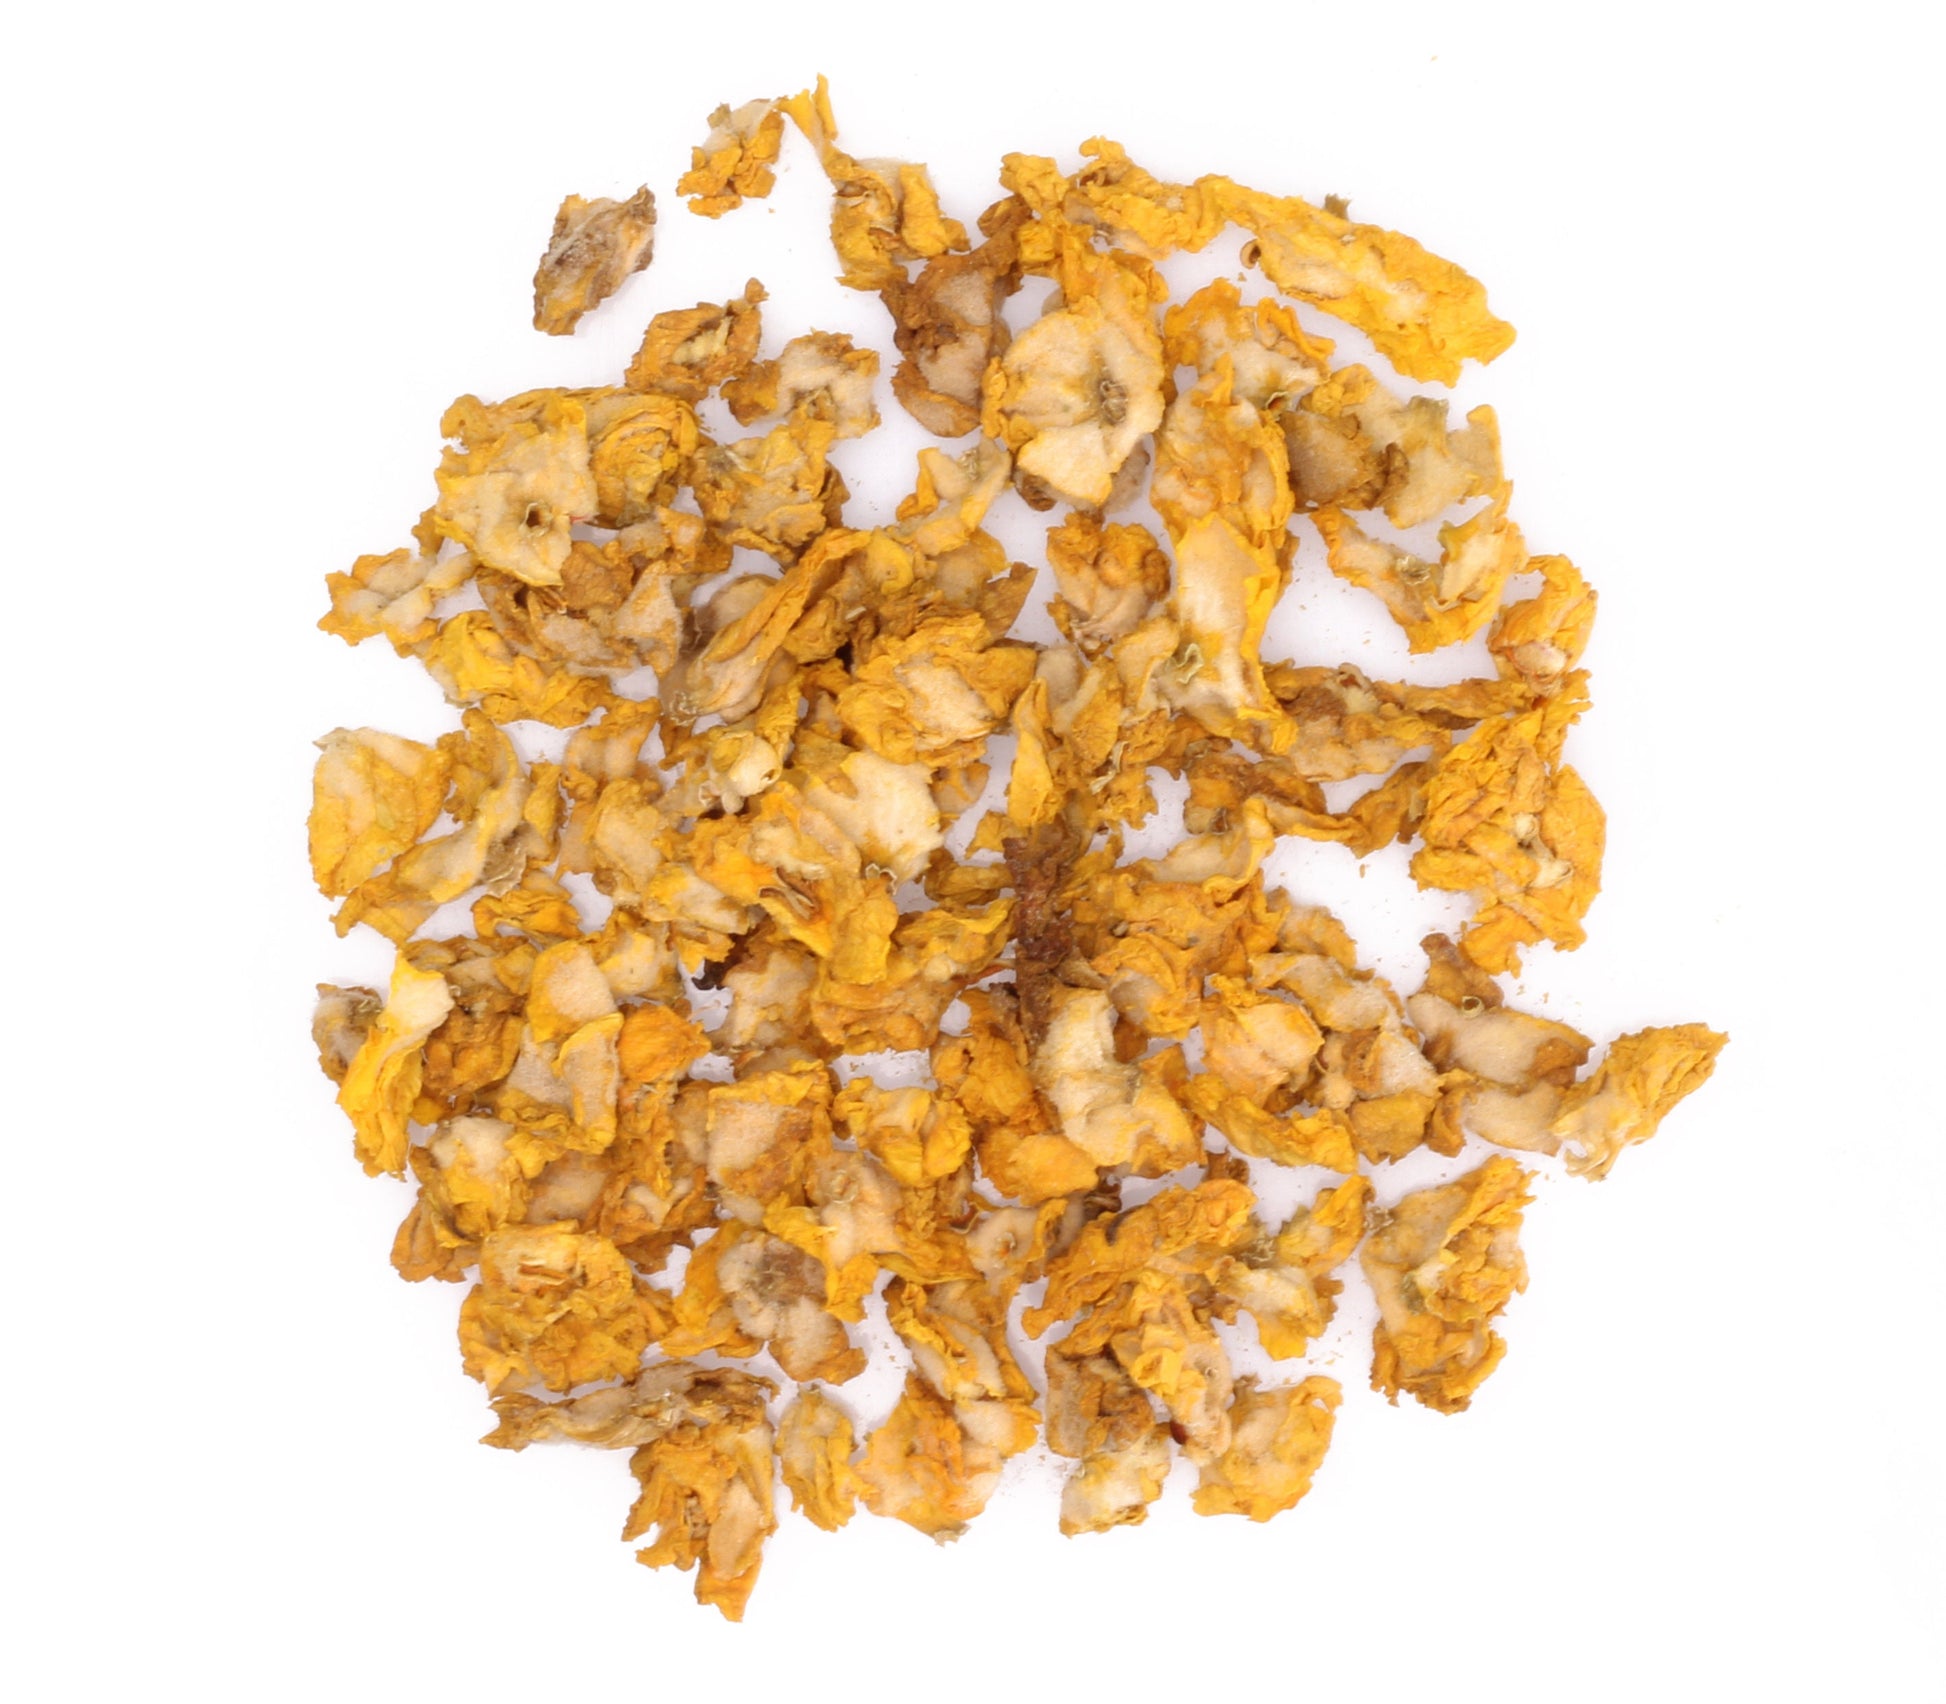 Dried Organic Mullein Flowers / Available from 1oz to 32oz/ Organic Mullein Flower / Herbal Tea / Verbascum Thapsus Vesta Market